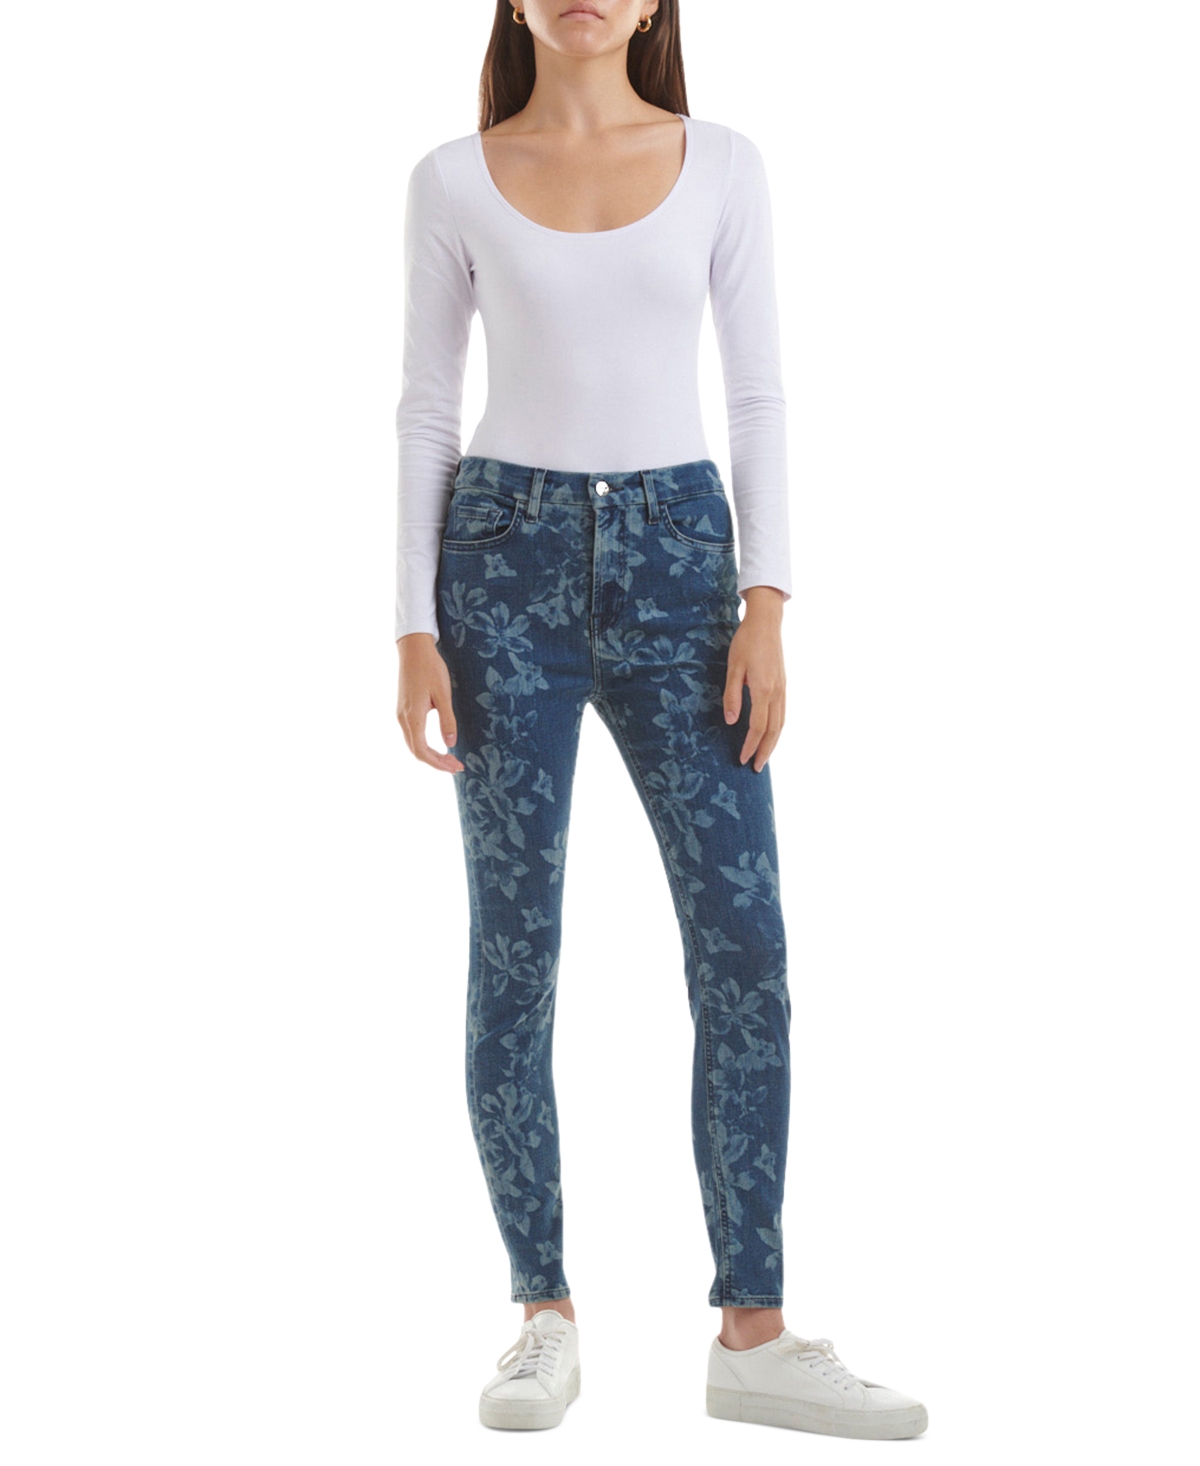 JEN7 by 7 For All Mankind Women's Floral Print High-Rise Skinny Jeans